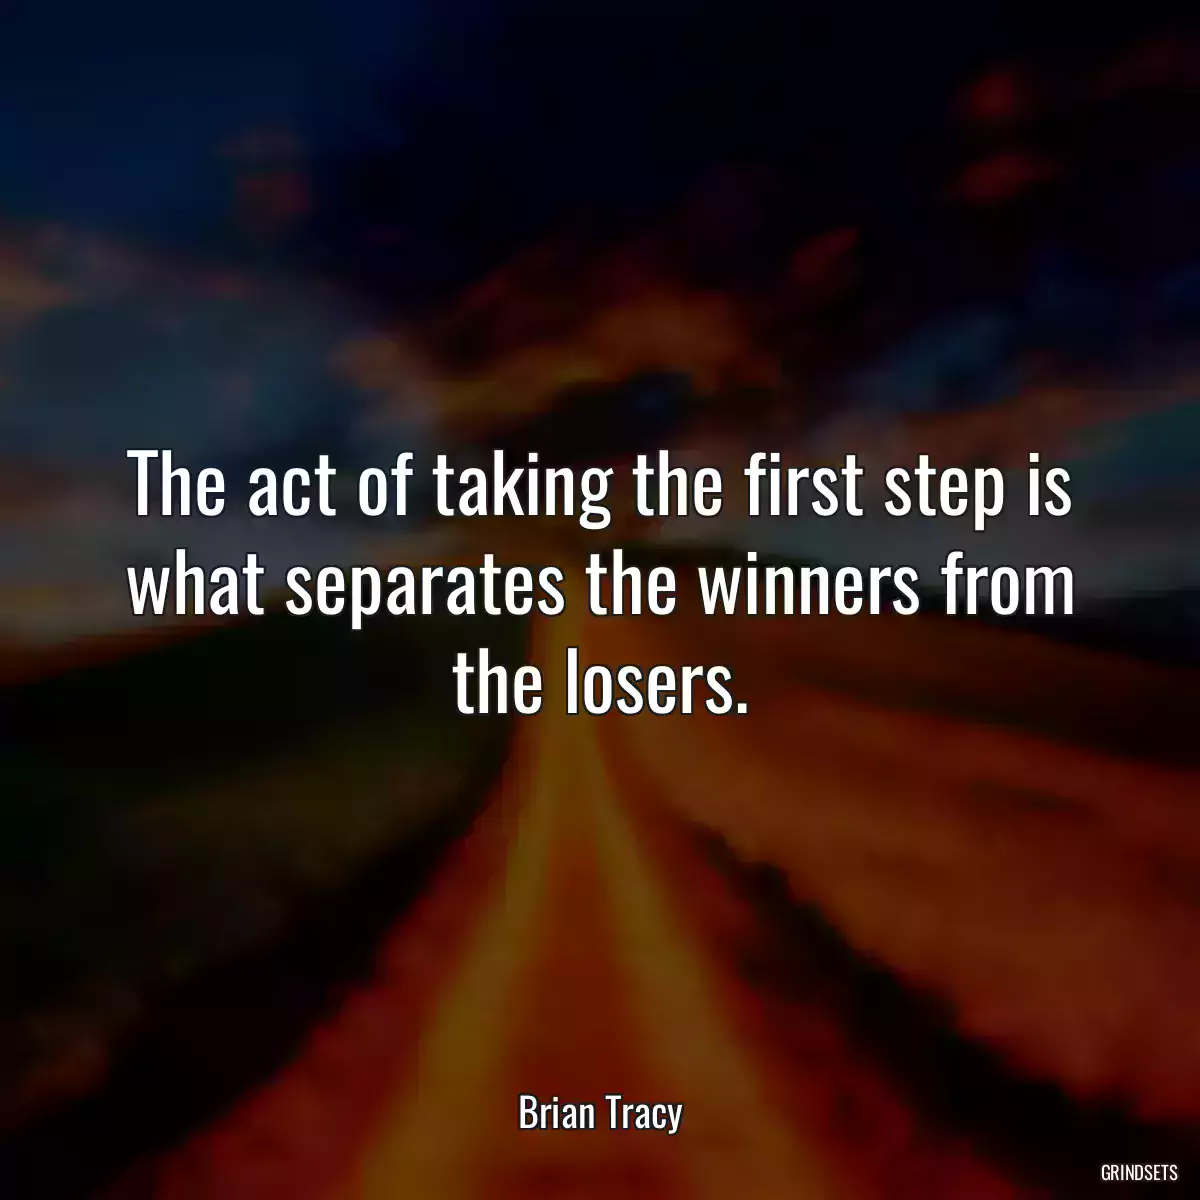 The act of taking the first step is what separates the winners from the losers.